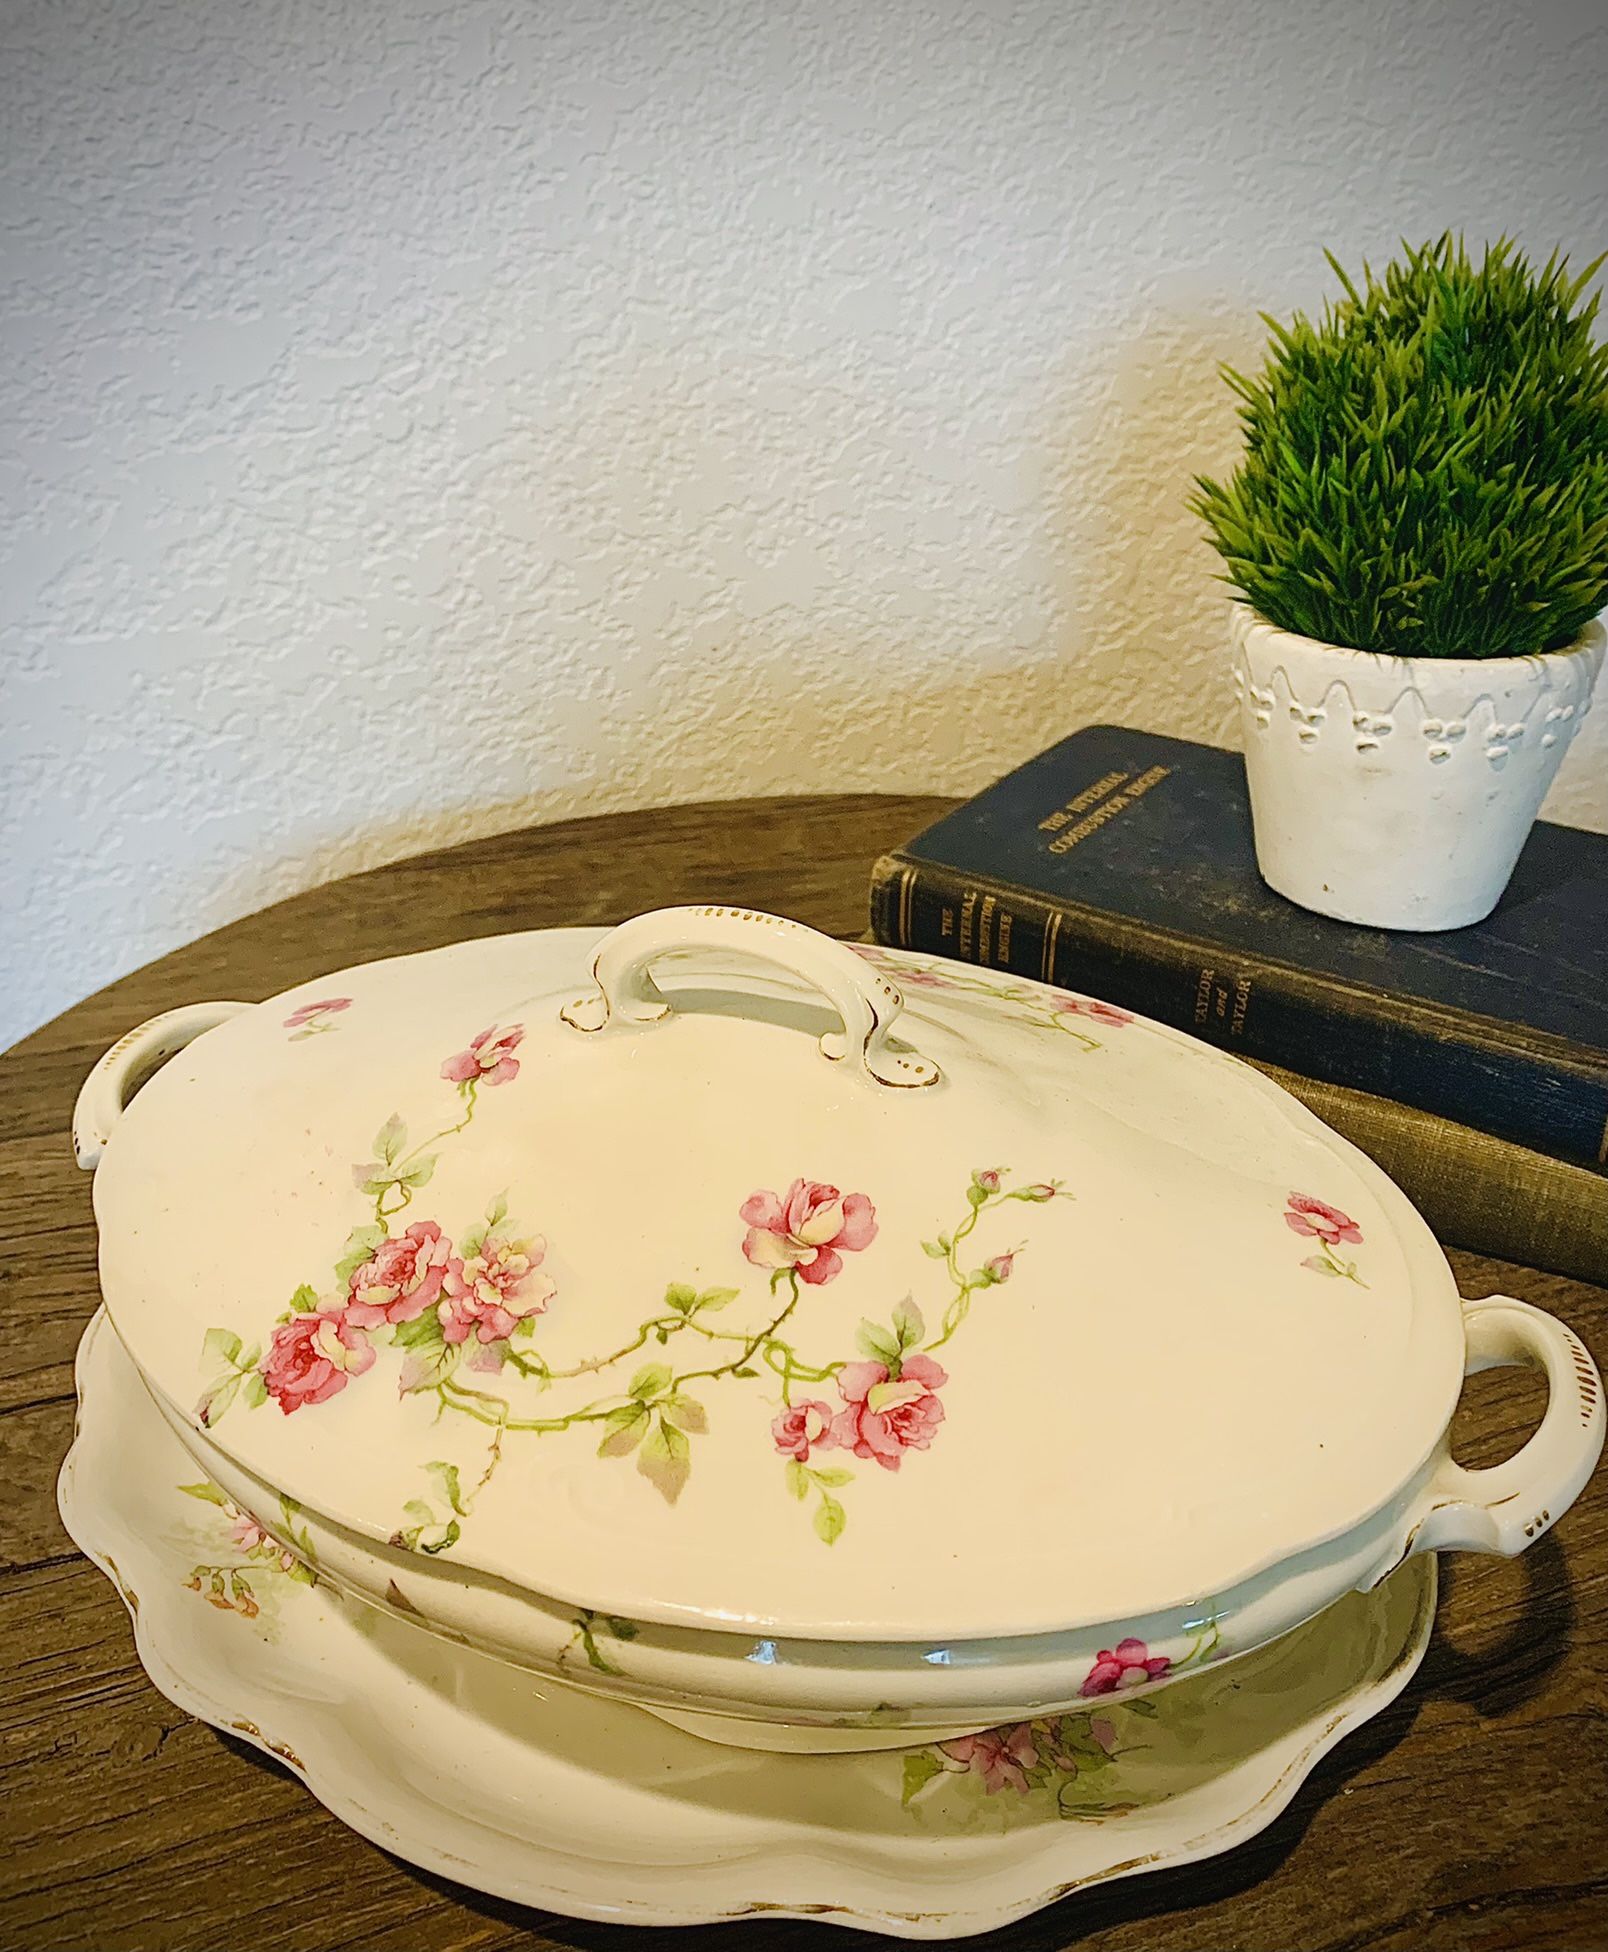 Gorgeous Vintage Lemoges French Casserole-Vegetable Dish With Floral Motif, Lid and Matching Plate!!